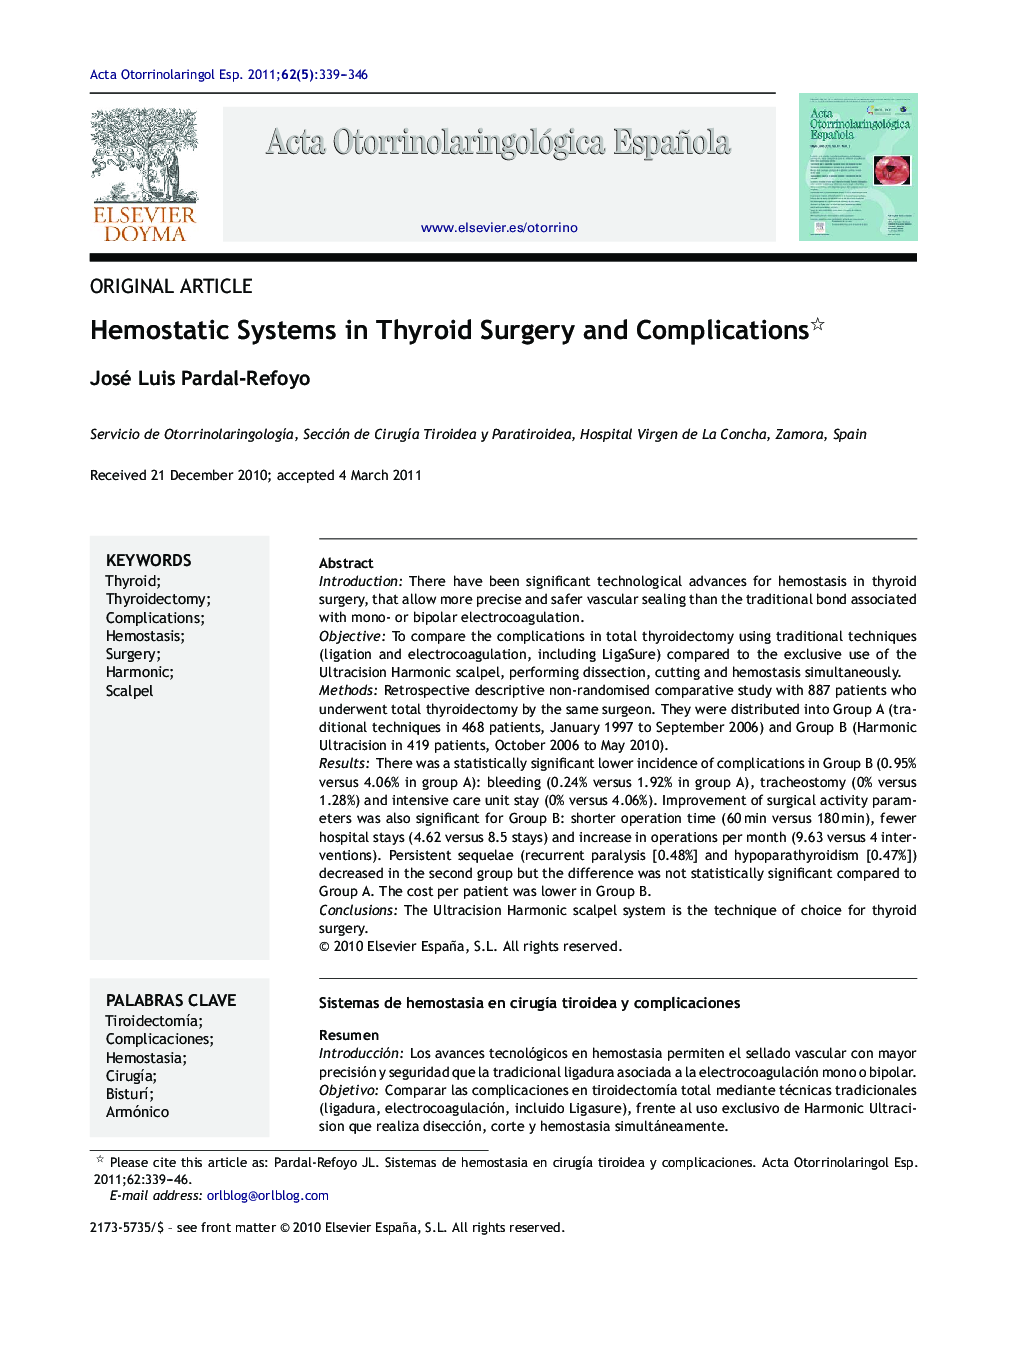 Hemostatic Systems in Thyroid Surgery and Complications 